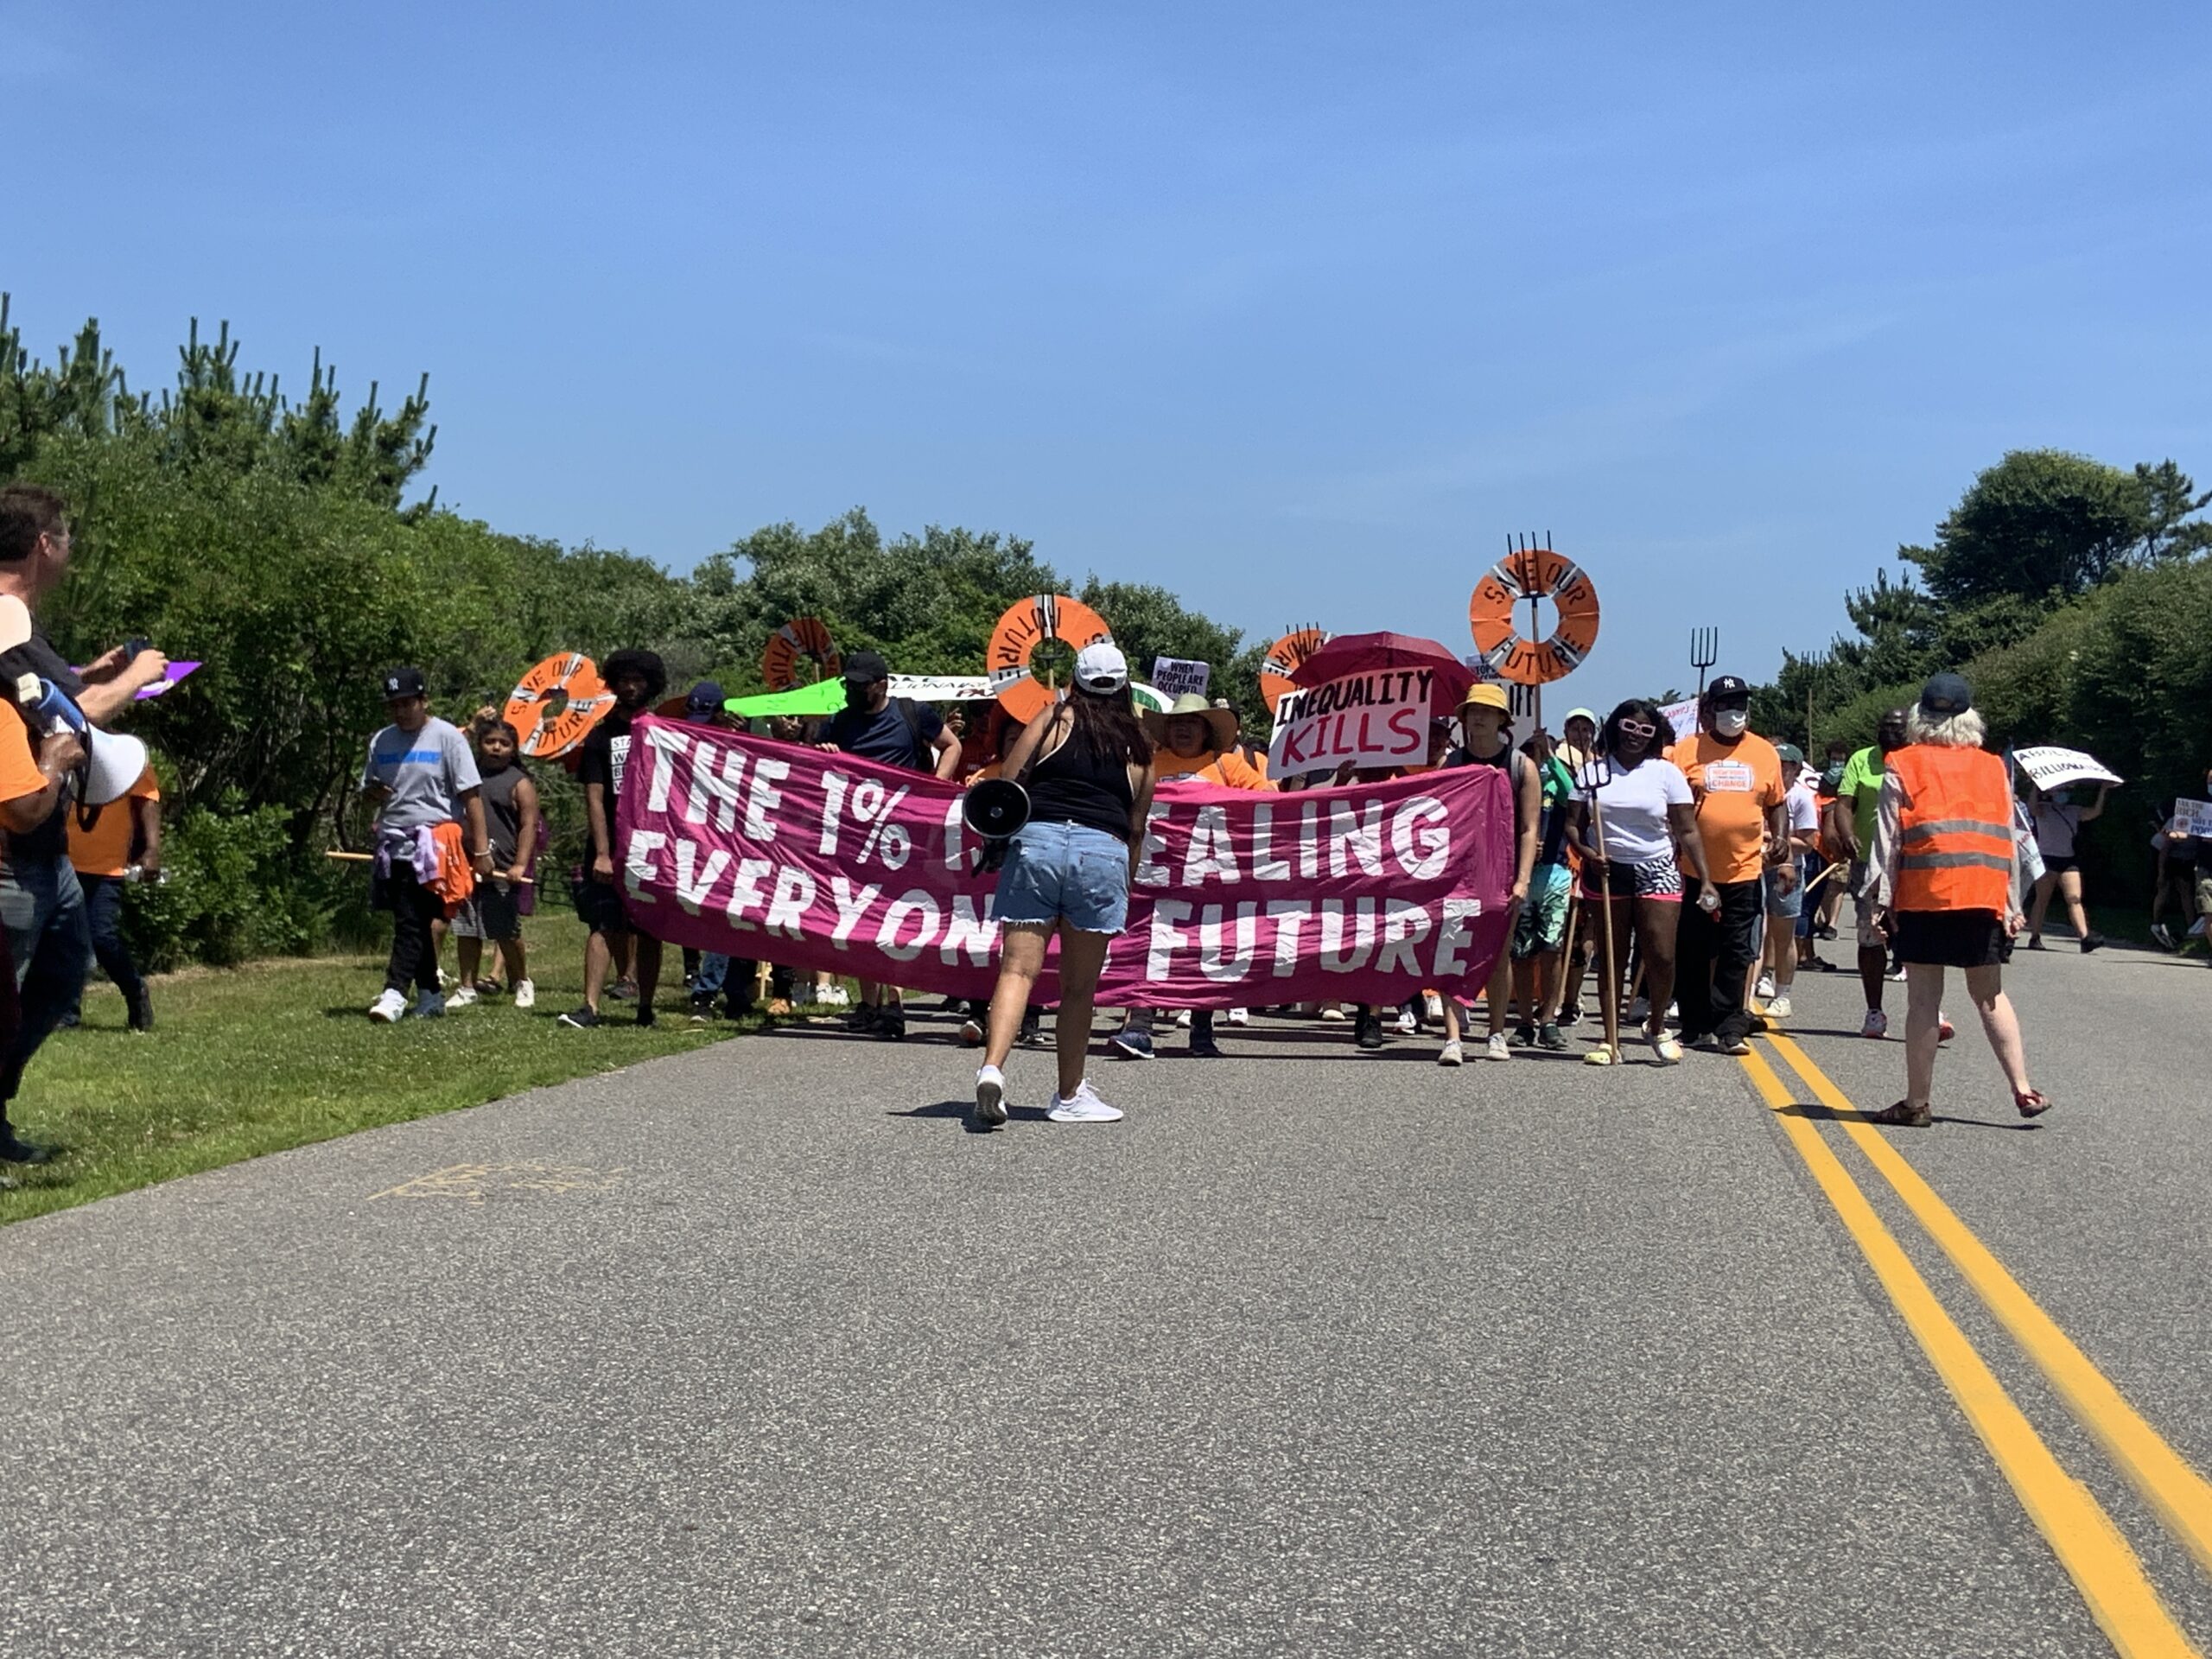 Protesters calling for higher taxes on billionaires to help cover the costs of everything from childcare to climate change mitigation, marched on Meadow Lane in Southampton Village on Saturday.  STEPHEN J. KOTZ